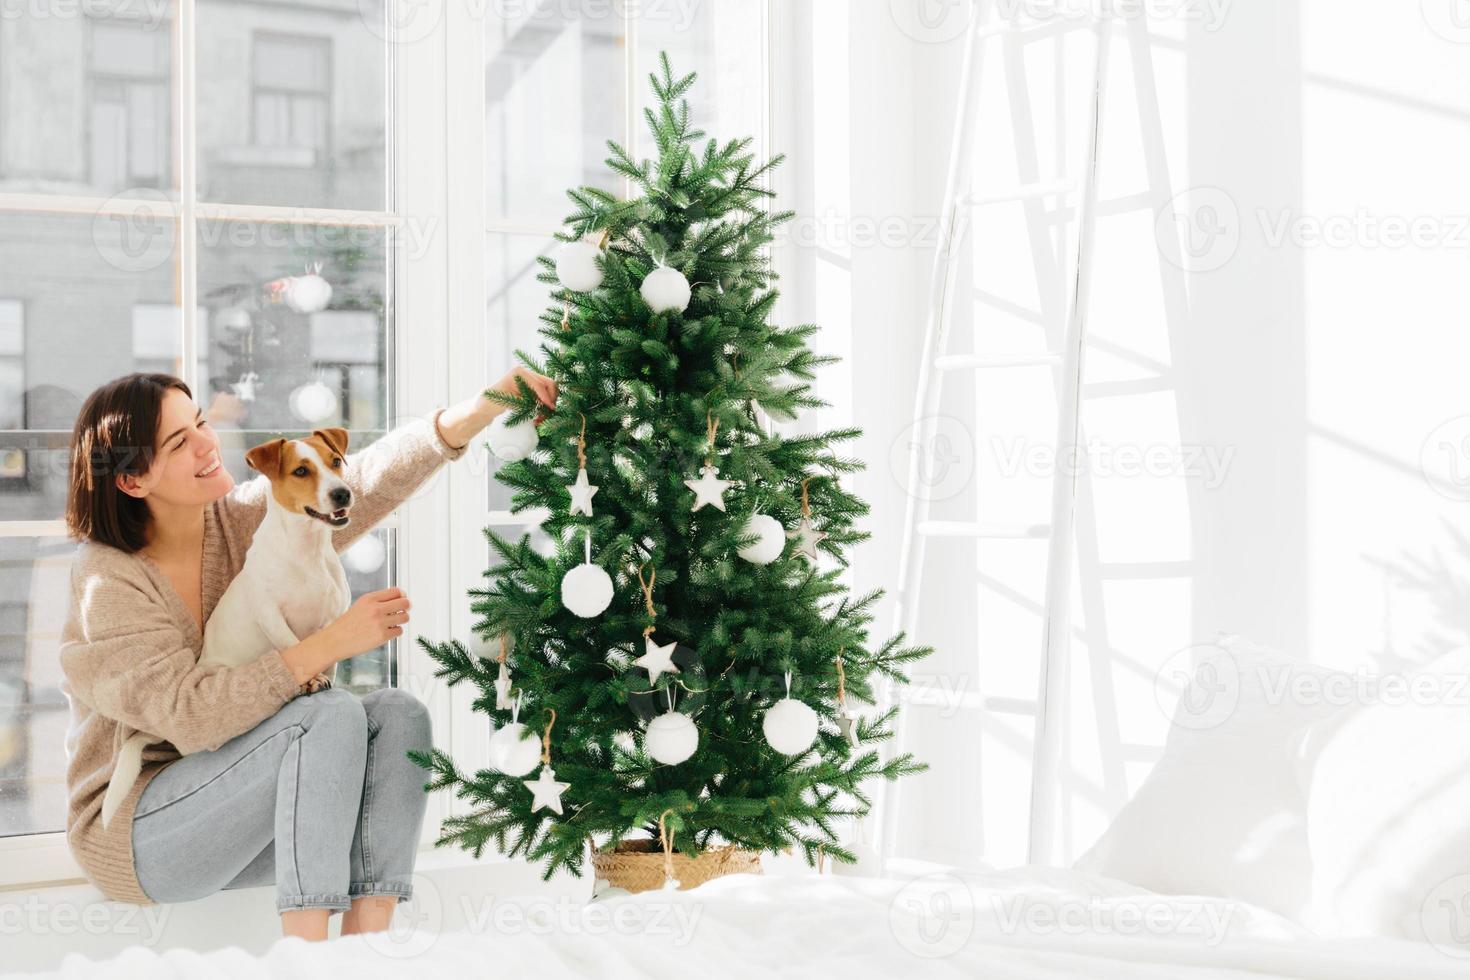 Morning before Chtistmas. Merry delighted woman sits on windowsill with pedigree jack russell terrier dog, enjoy New Year holiday, decorate firtree with decoration ball. People, animals, winter time photo